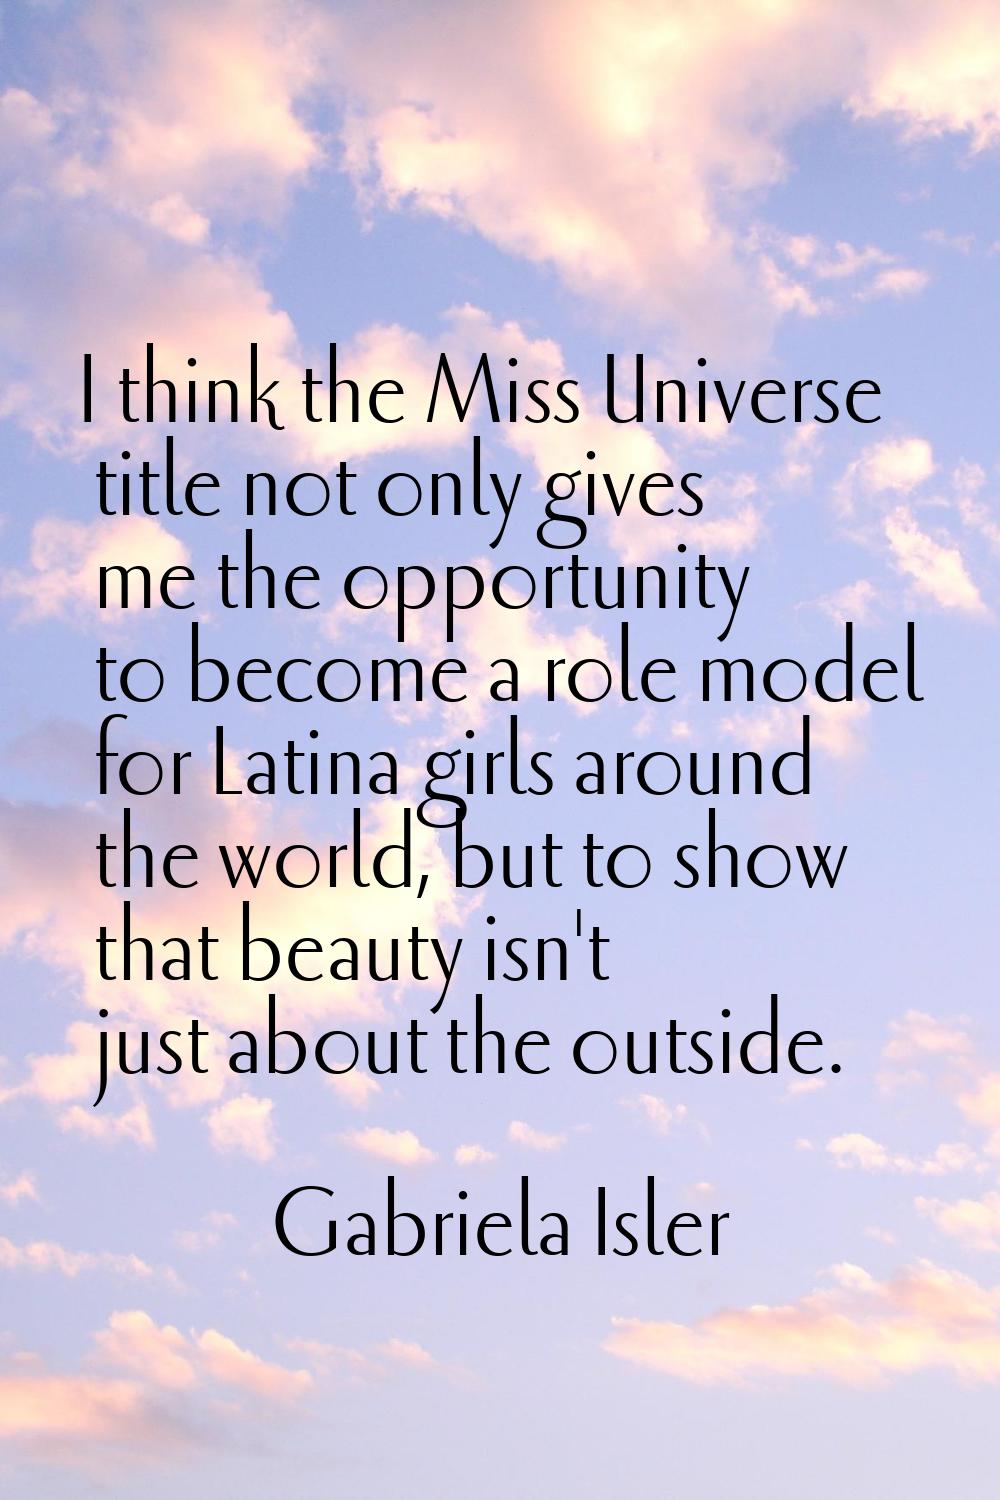 I think the Miss Universe title not only gives me the opportunity to become a role model for Latina